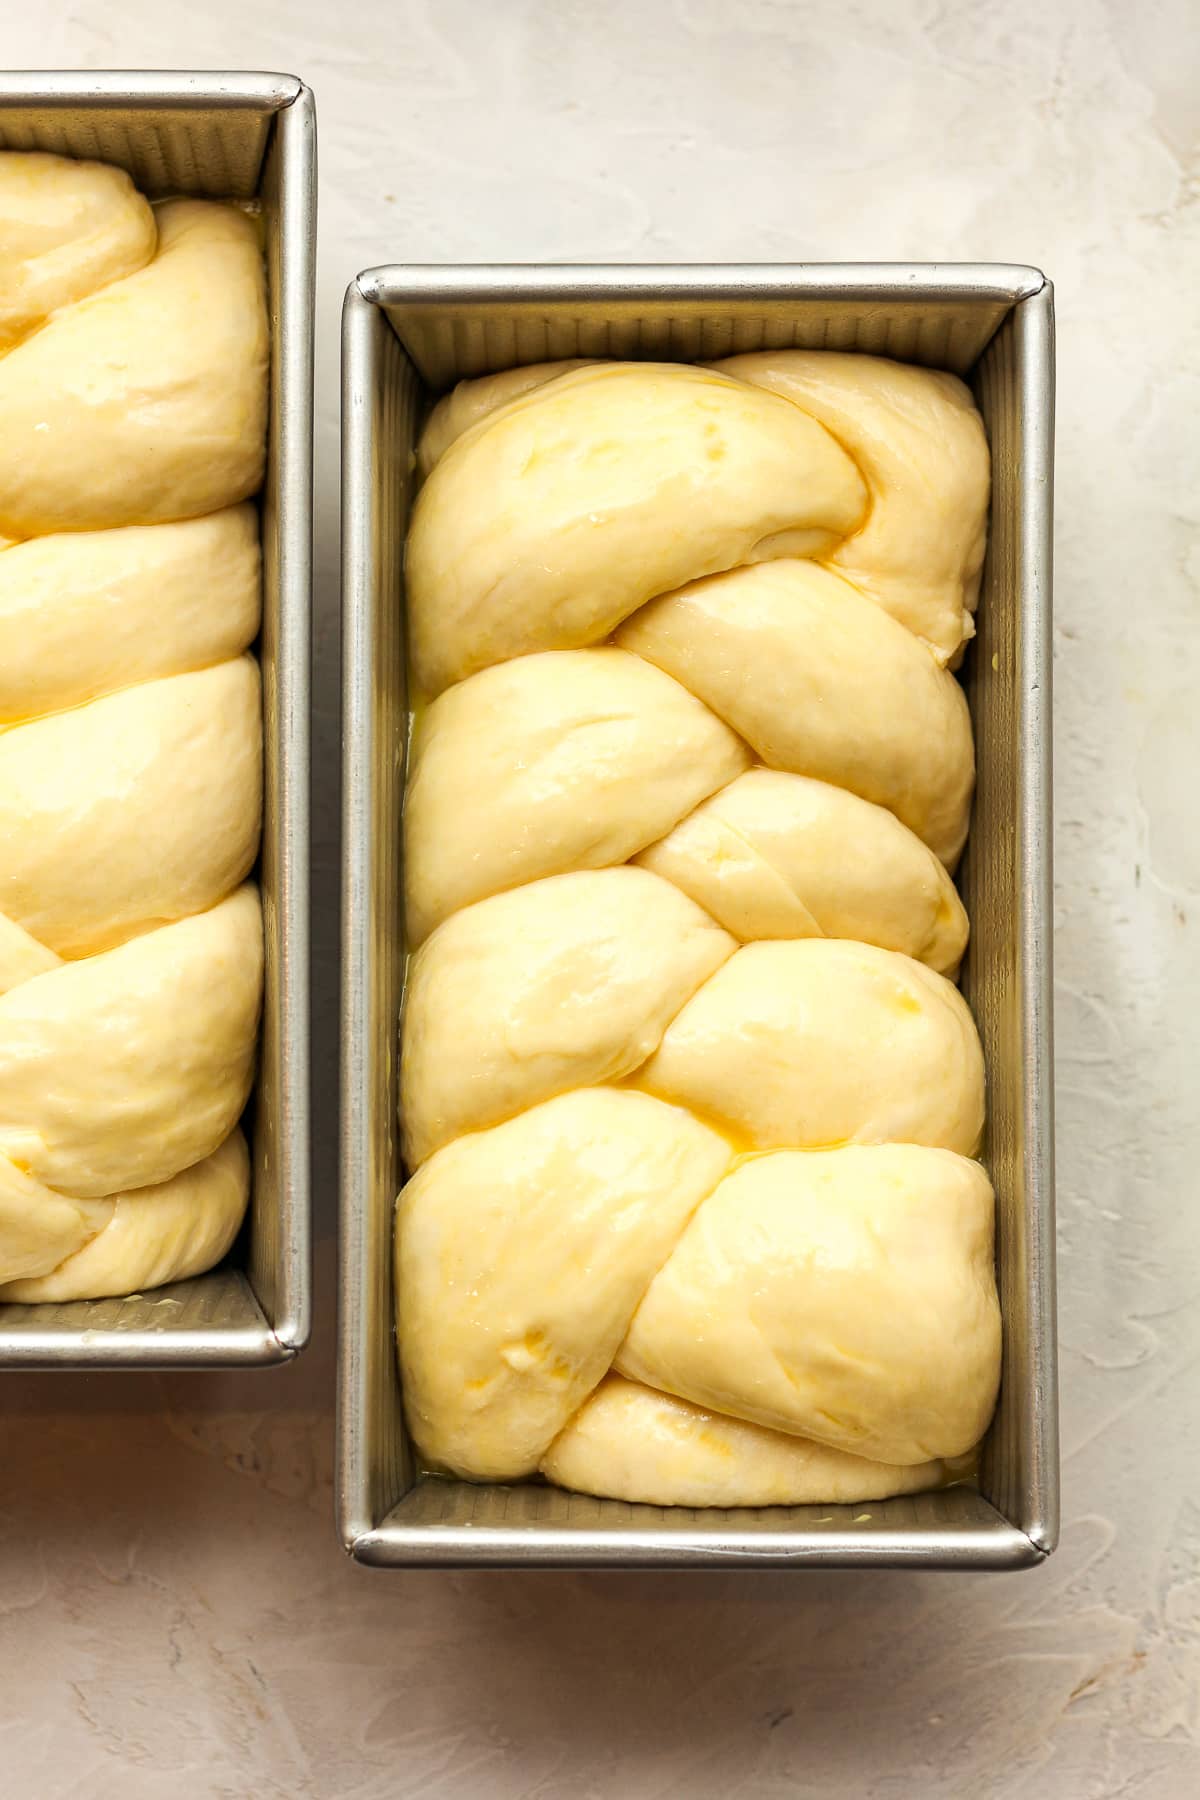 Two loaf pans of braided brioche bread.